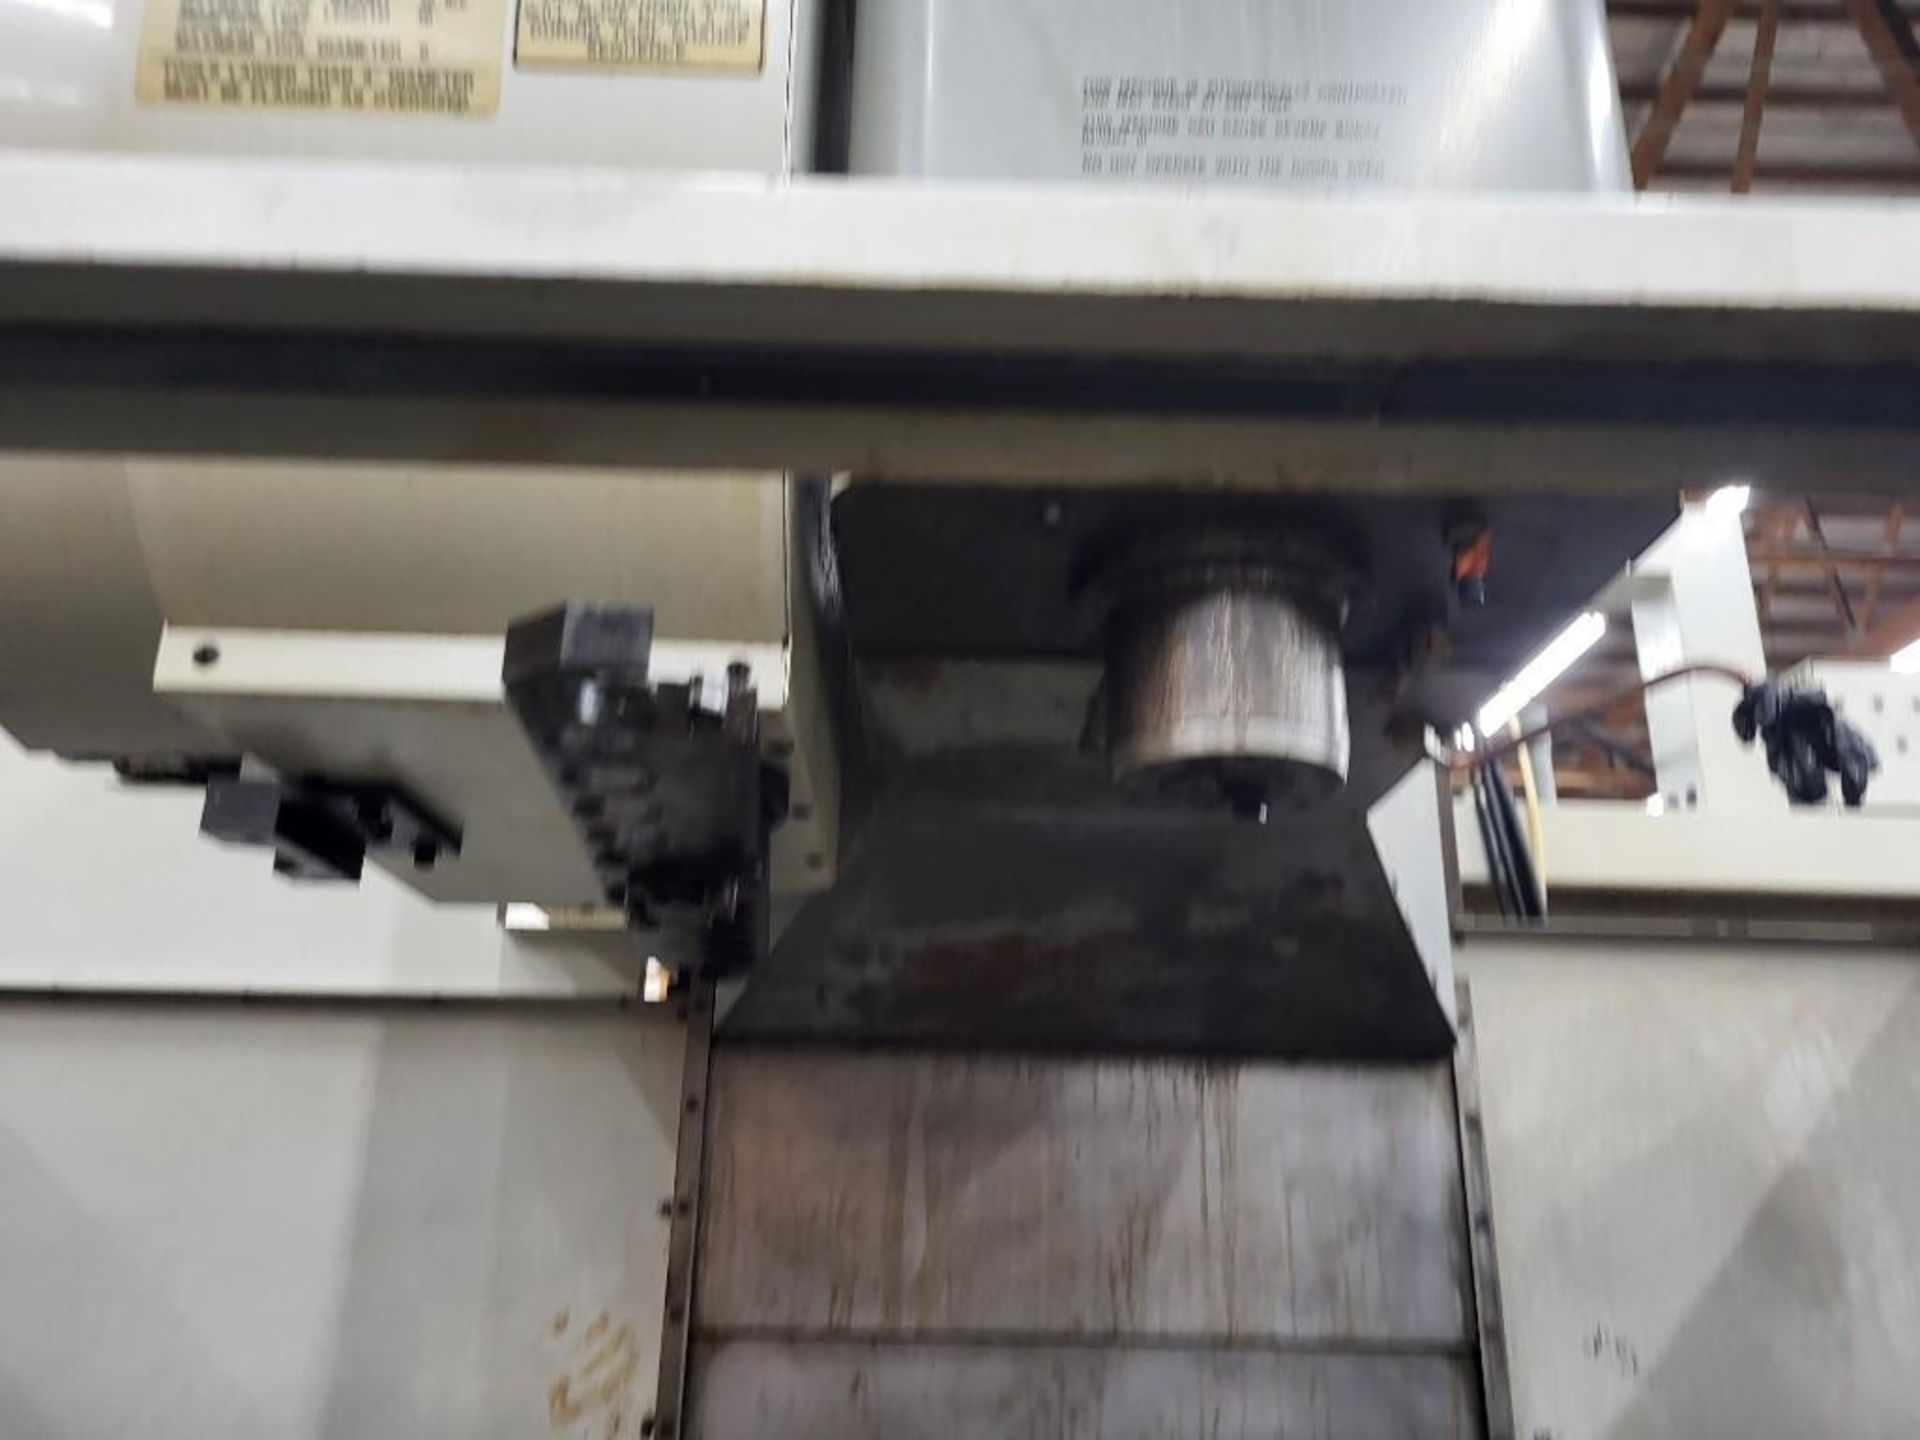 1999 HAAS VF-6 CNC VERTICAL MACHINING CENTER - Image 11 of 17